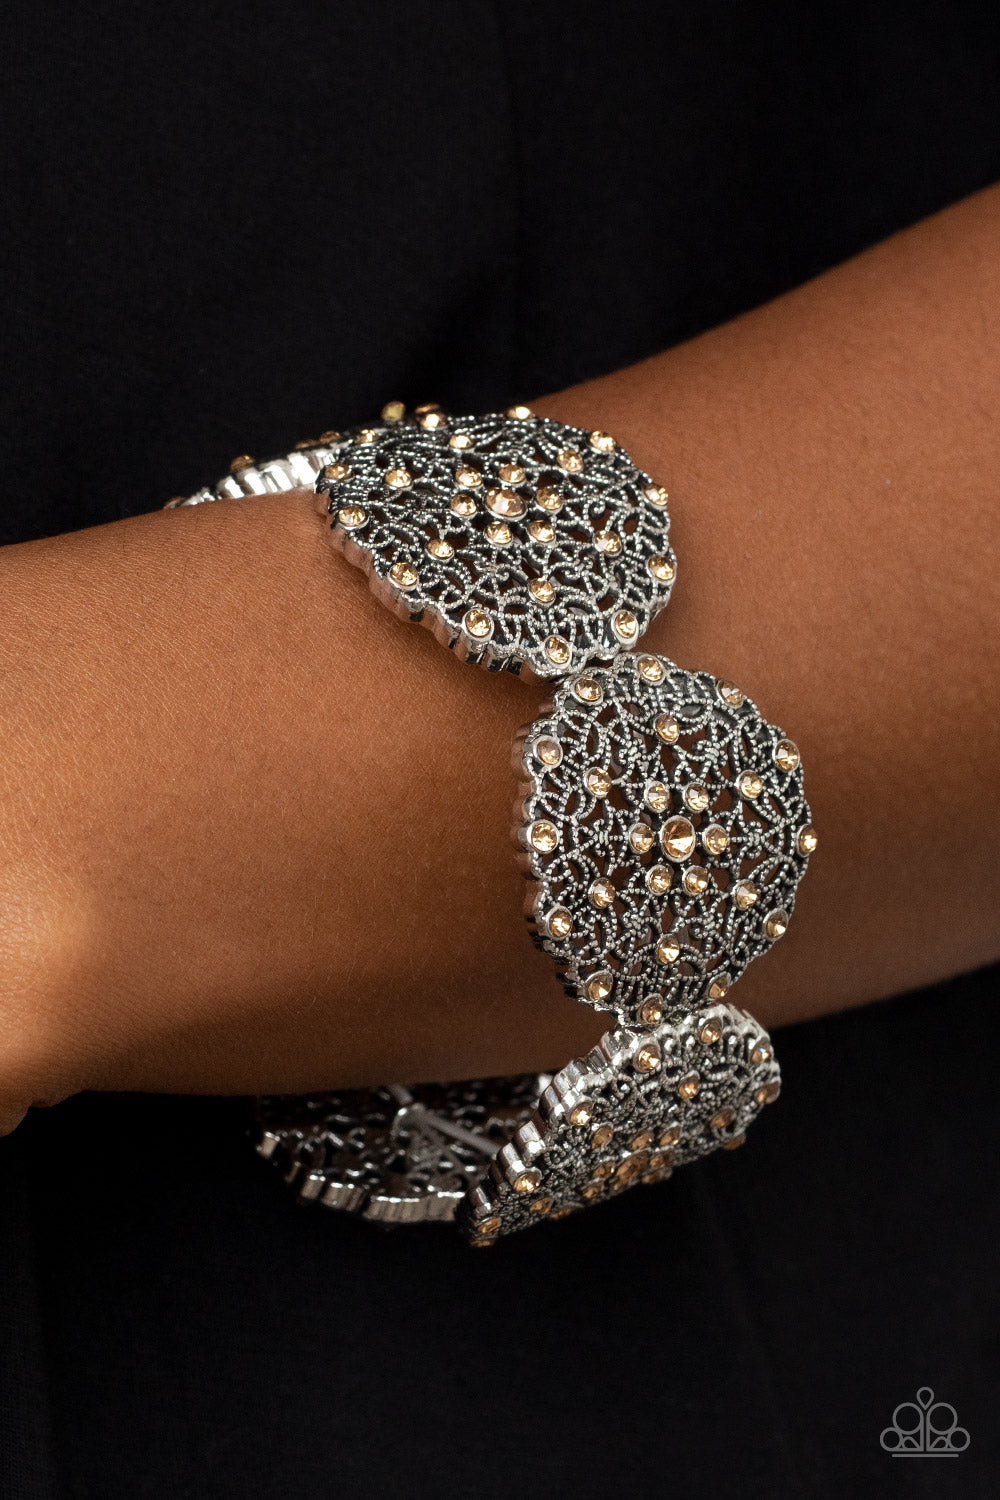 All in the Details Brown Bracelet - Paparazzi Accessories  Dotted with golden topaz rhinestones, studded silver frames are filled with mandala-like filigree details and threaded along stretchy bands around the wrist for a glitzy pop of color.  Sold as one individual bracelet.